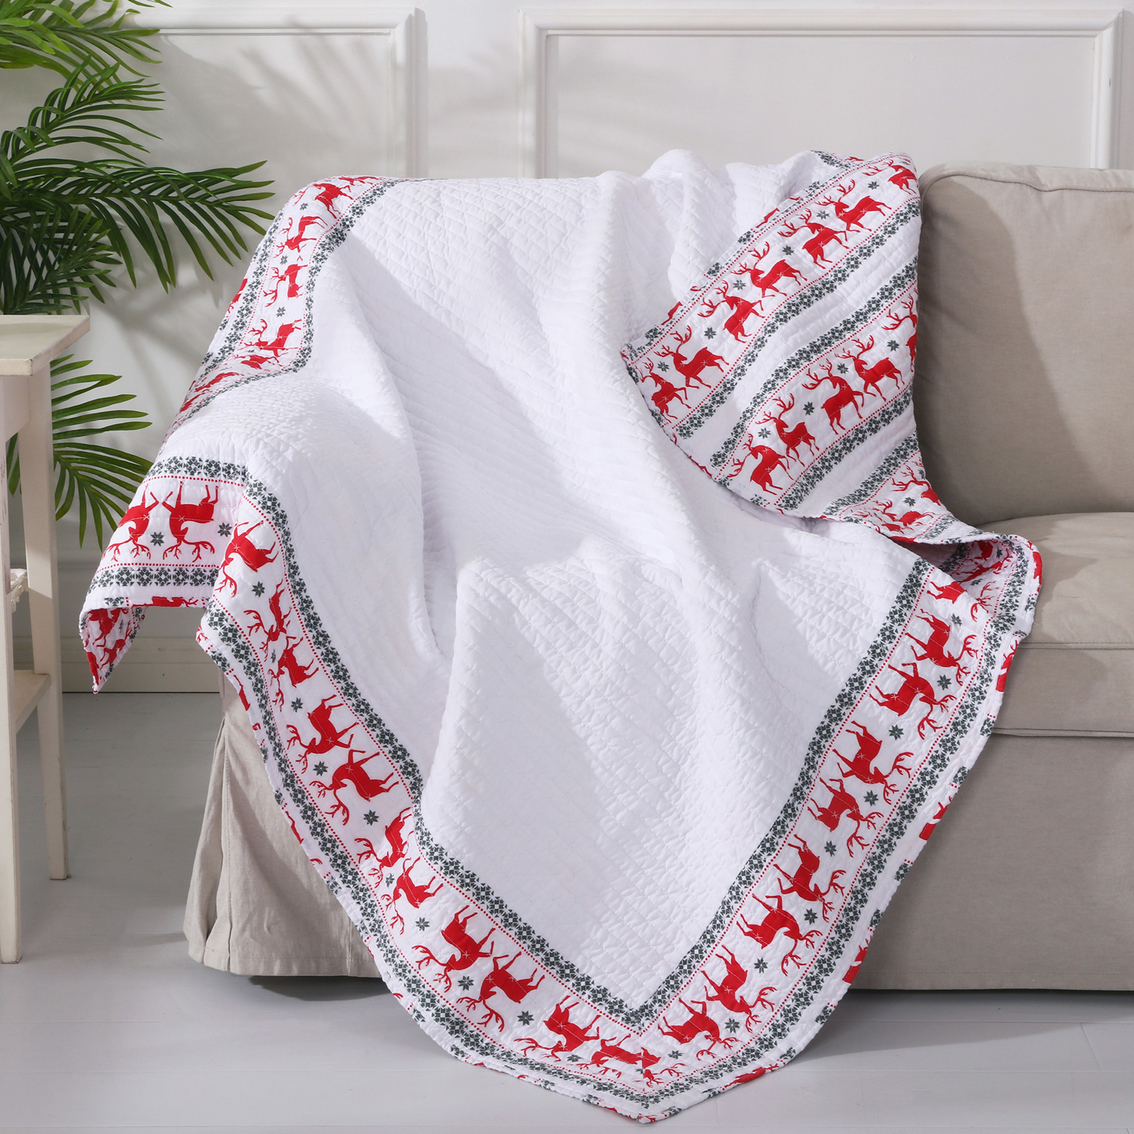 Levtex Home Rudolph Quilted Throw 50 in. x 60 in. - Image 2 of 2